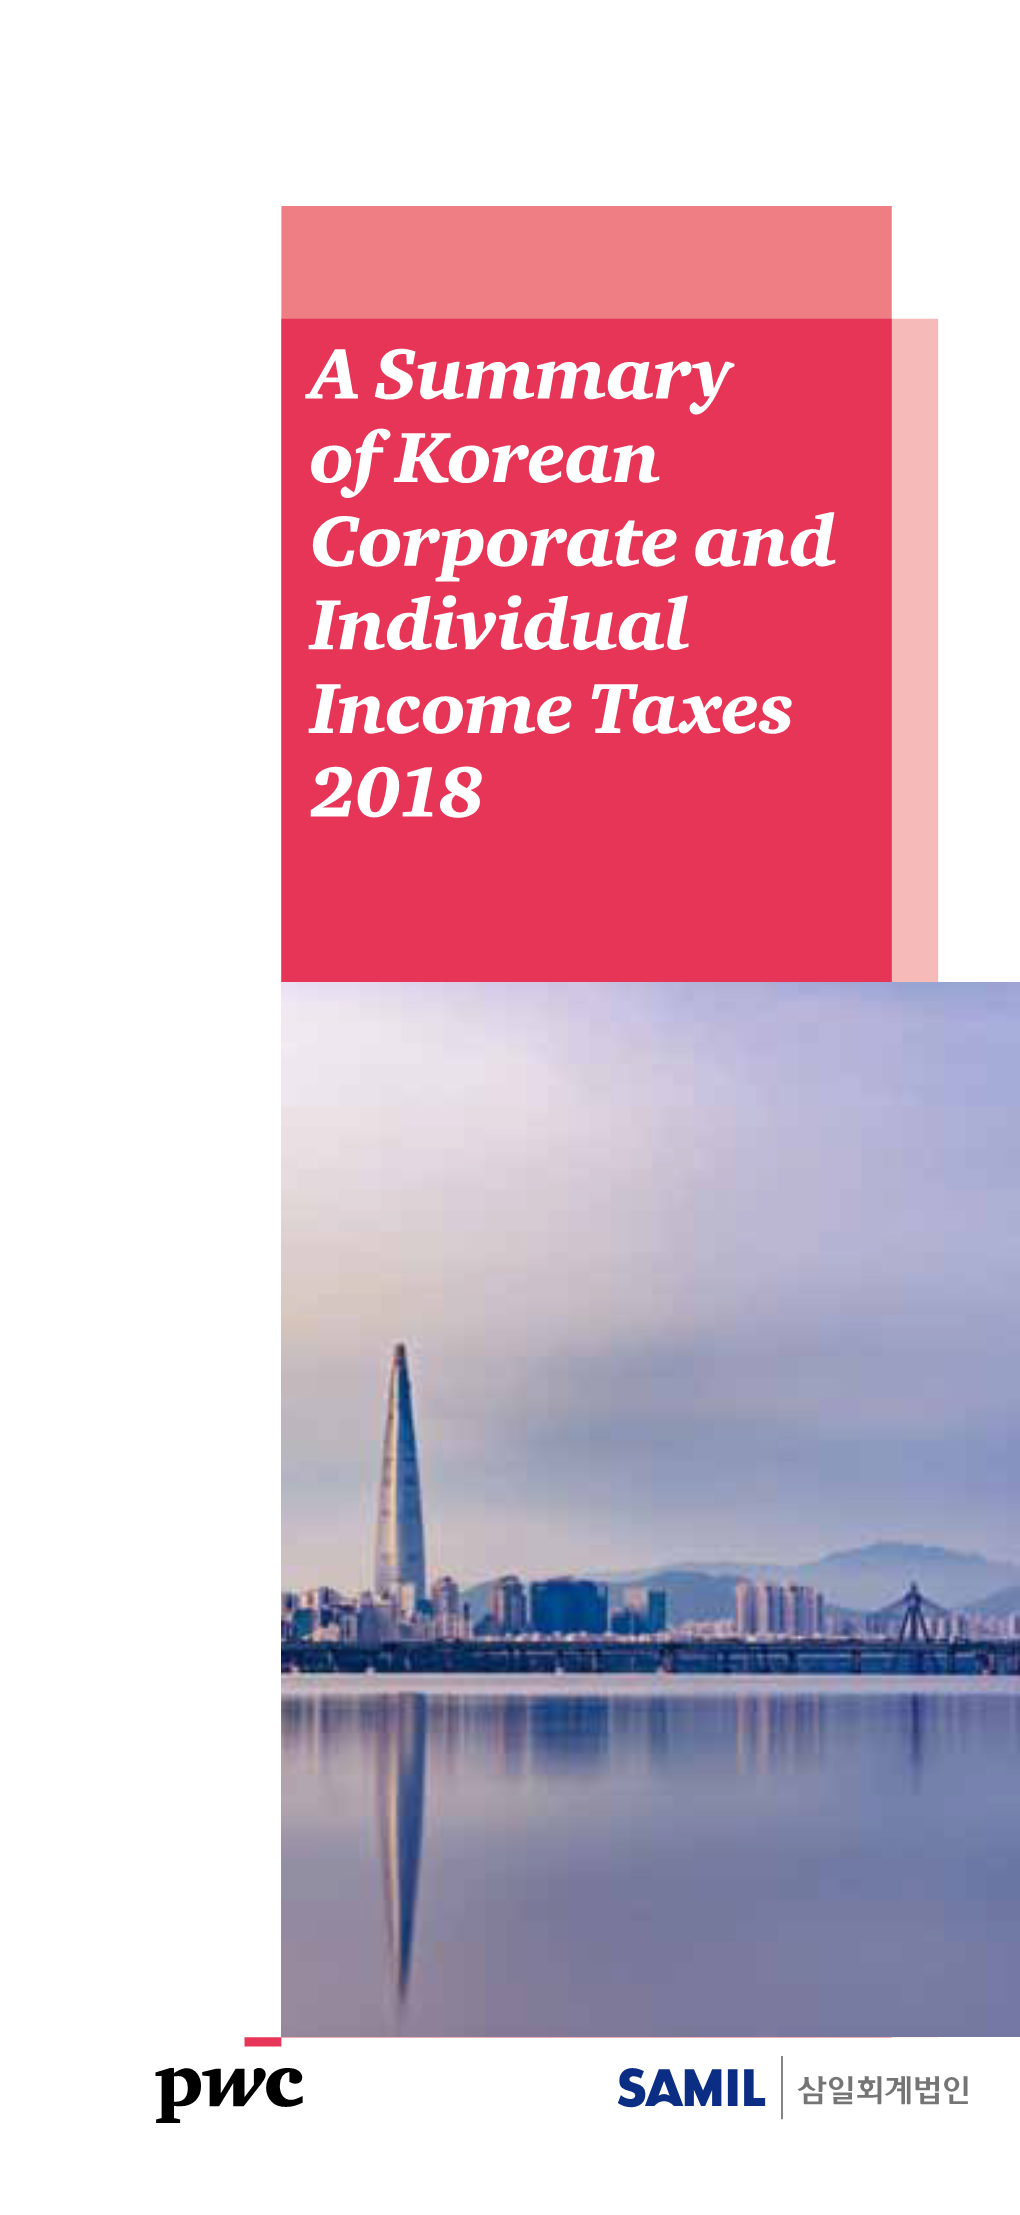 A Summary of Korean Corporate and Individual Income Taxes 2018 This Booklet Presents a Brief Overview of Korean Corporate and Individual Income Taxes